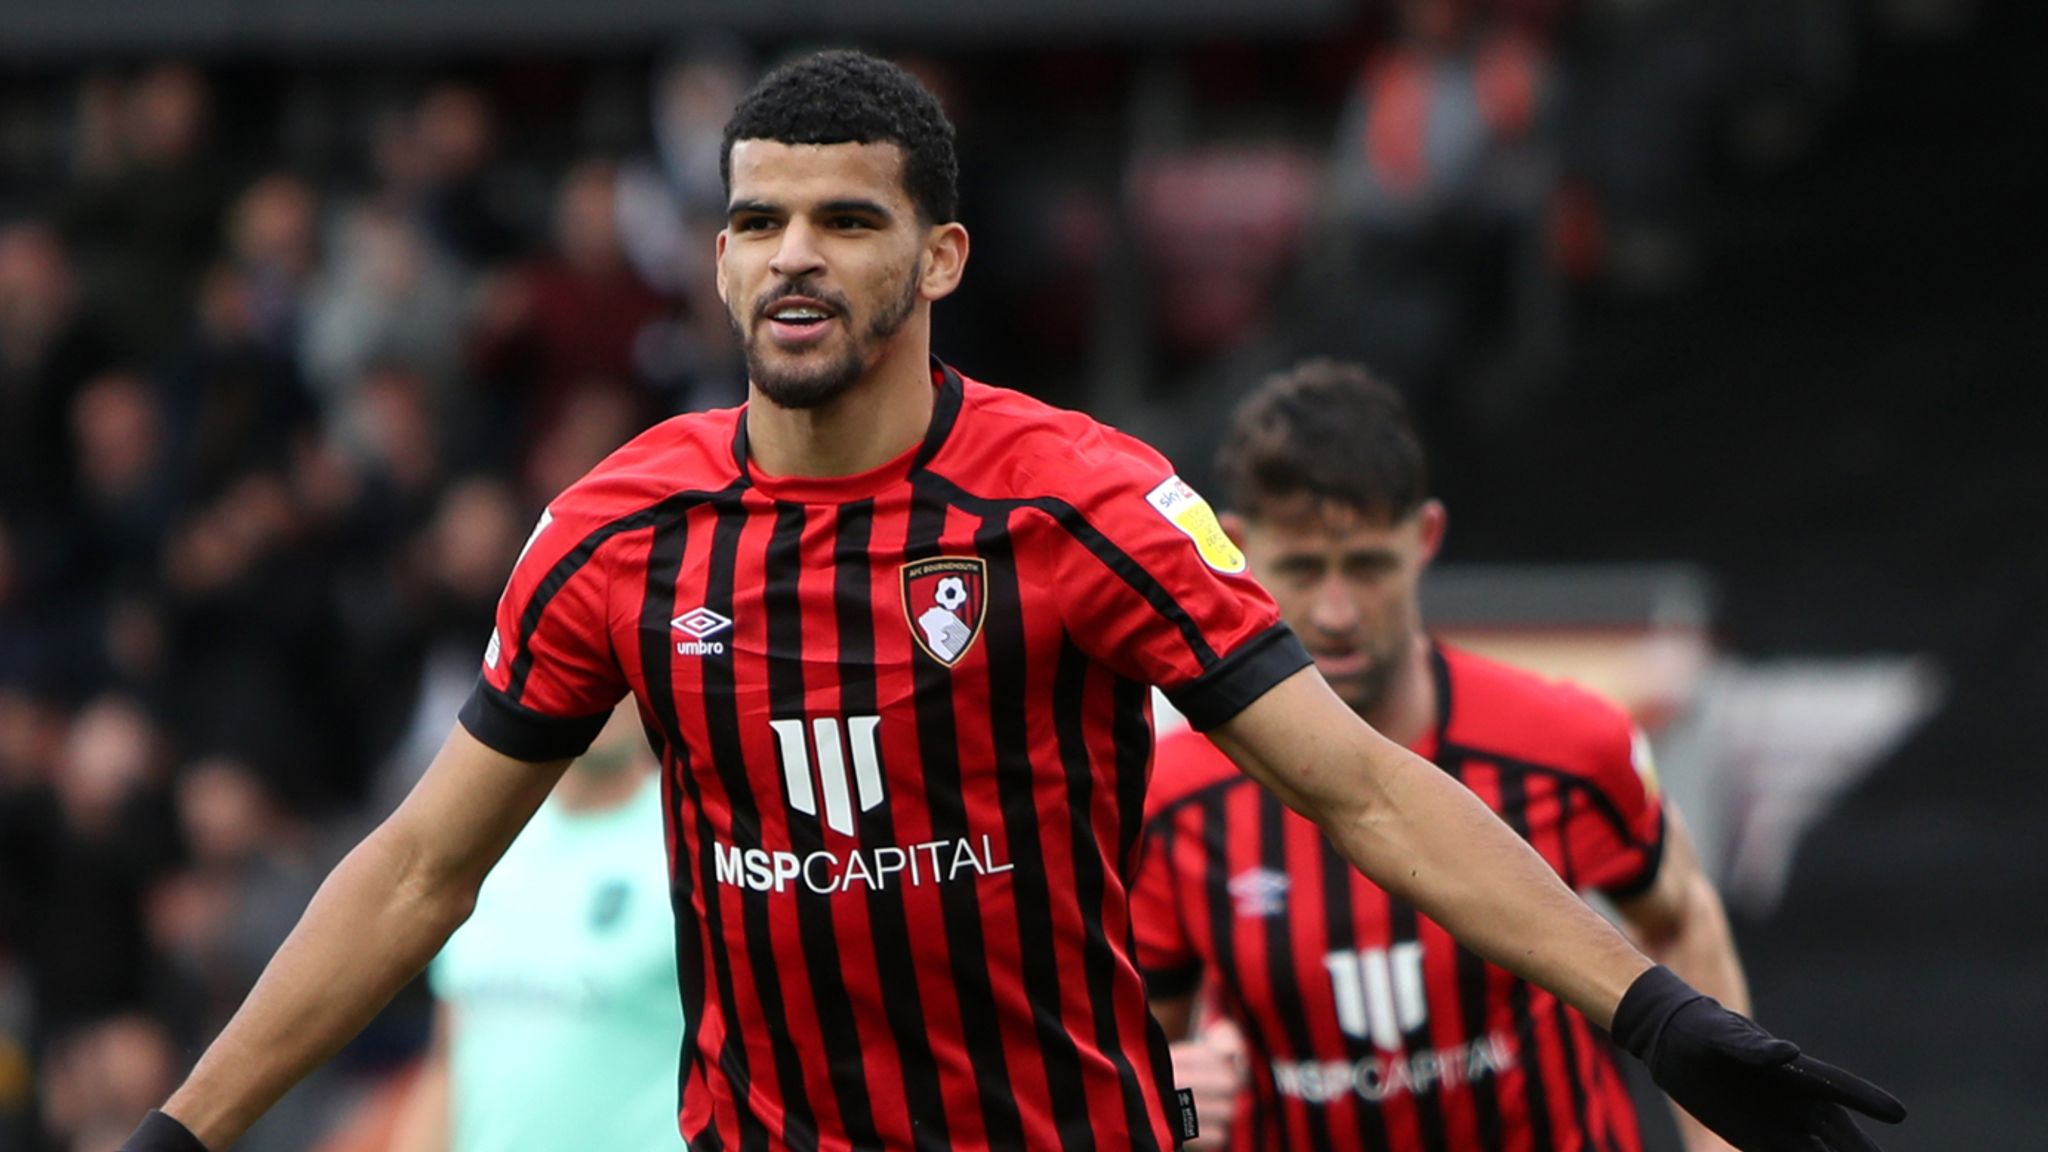 Bournemouth’s Dominic Solanke wins Premier League player of the month